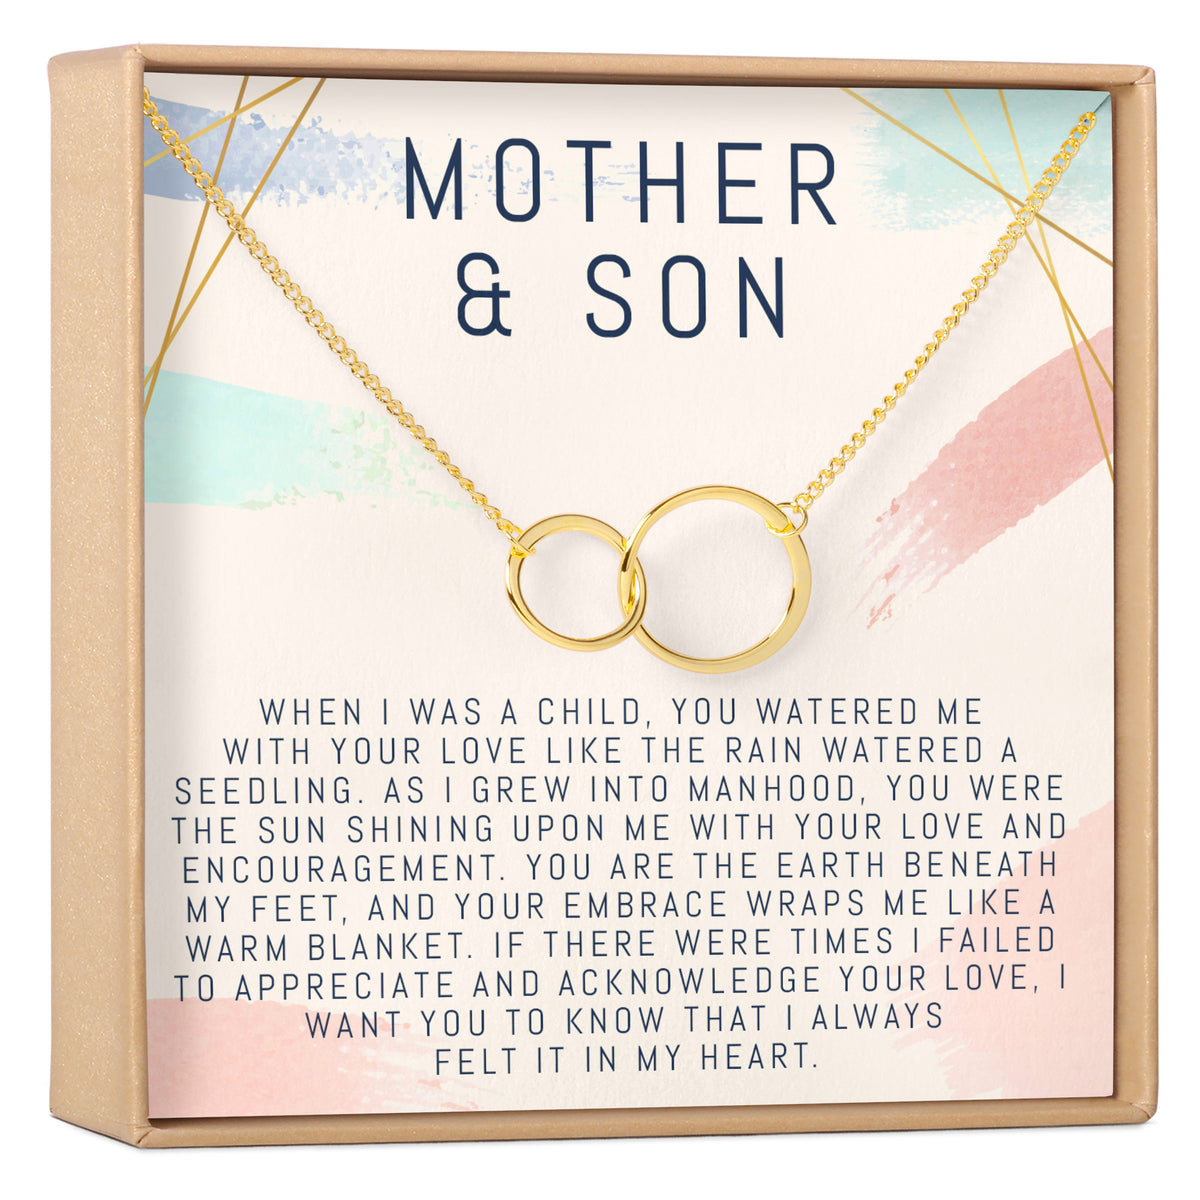 Buy Mother and Son Necklace, Mom Gift, Mother's Day Gift from Son, Birthday Gift, Christmas Gift, Jewelry for Mom, 14kt Gold Filled, Rose Silver